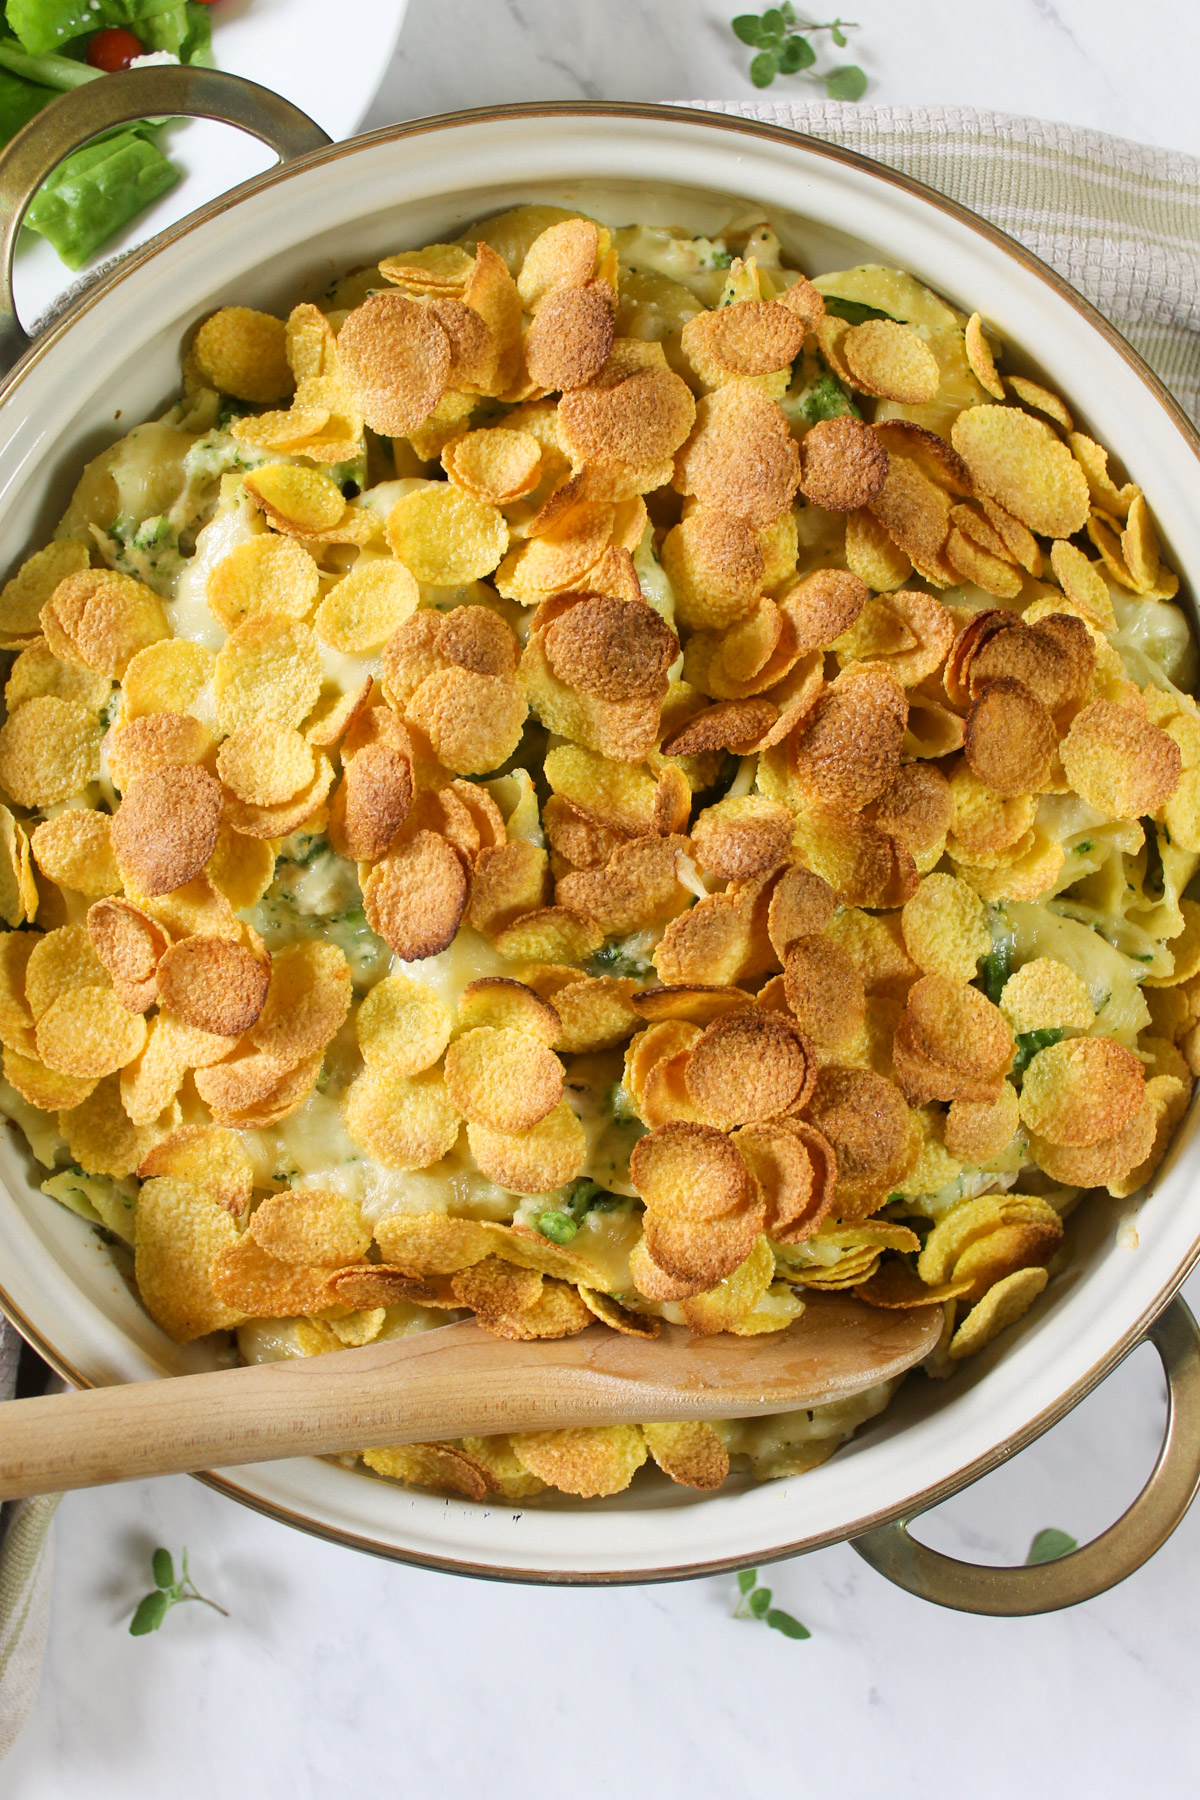 Tuna Broccoli Pasta Bake casserole in a gold rimmed baking dish with cornflake topping.